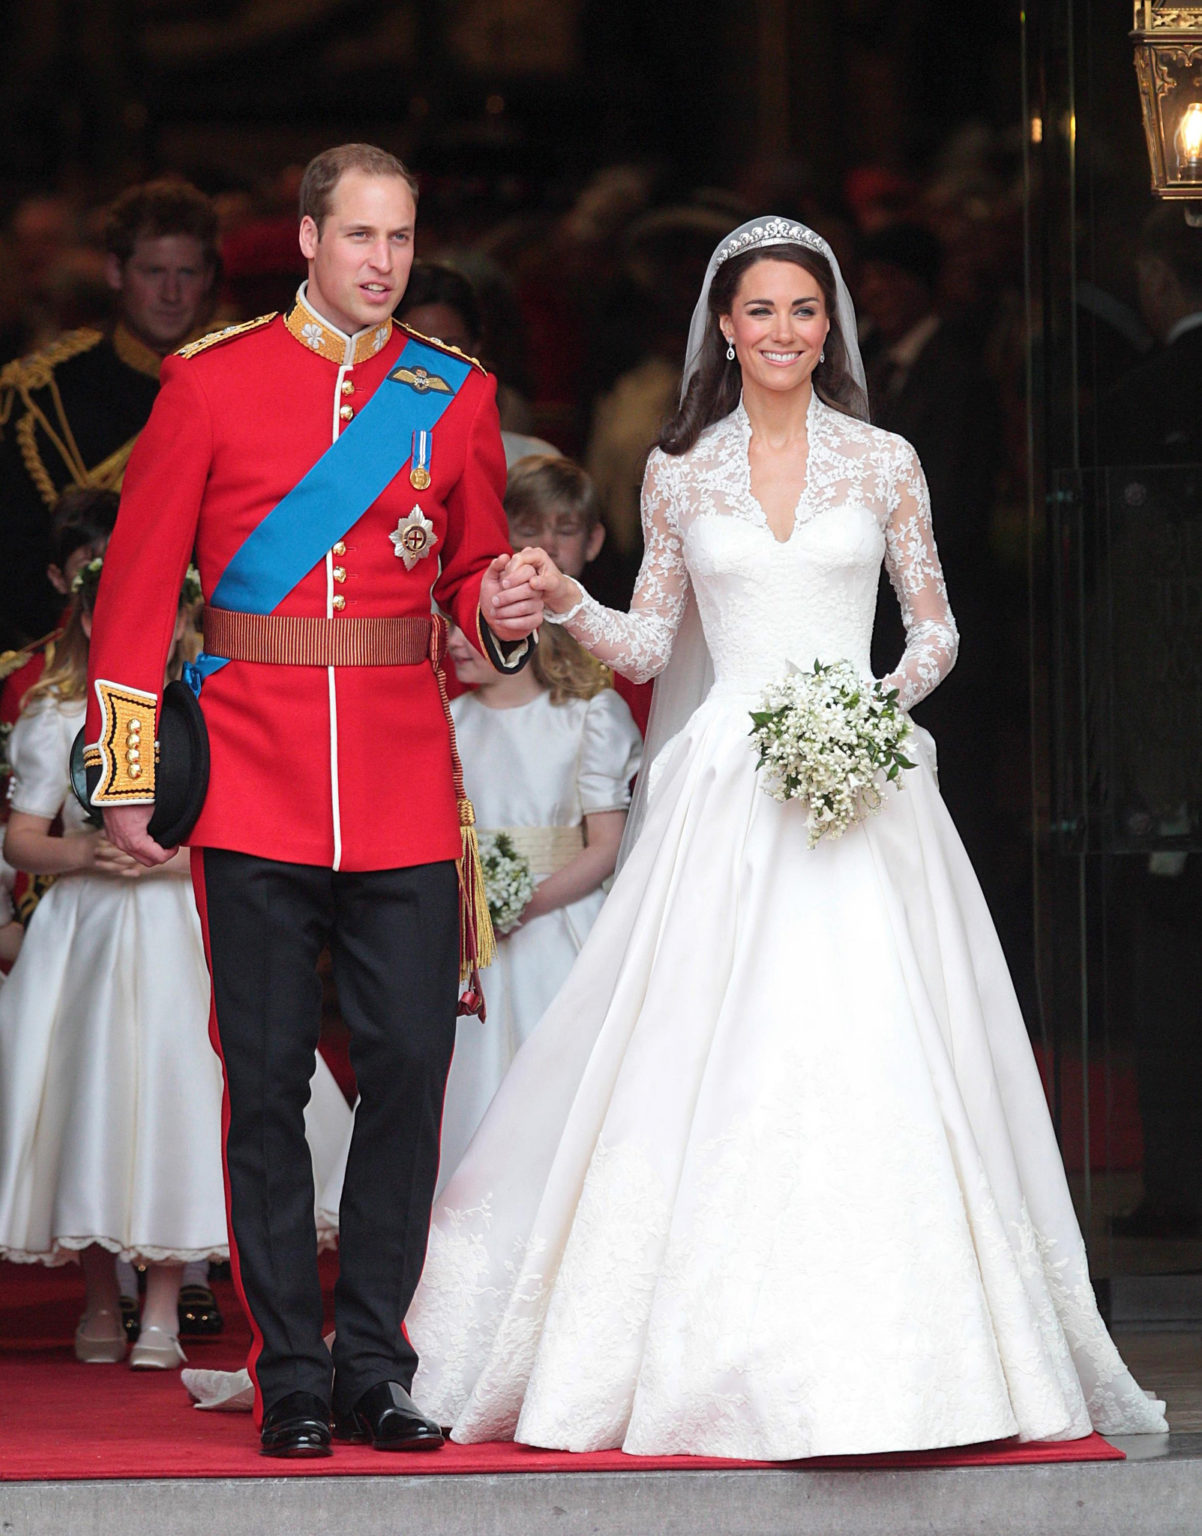 Happy 12th Anniversary to The Prince and Princess of Wales | RegalFille